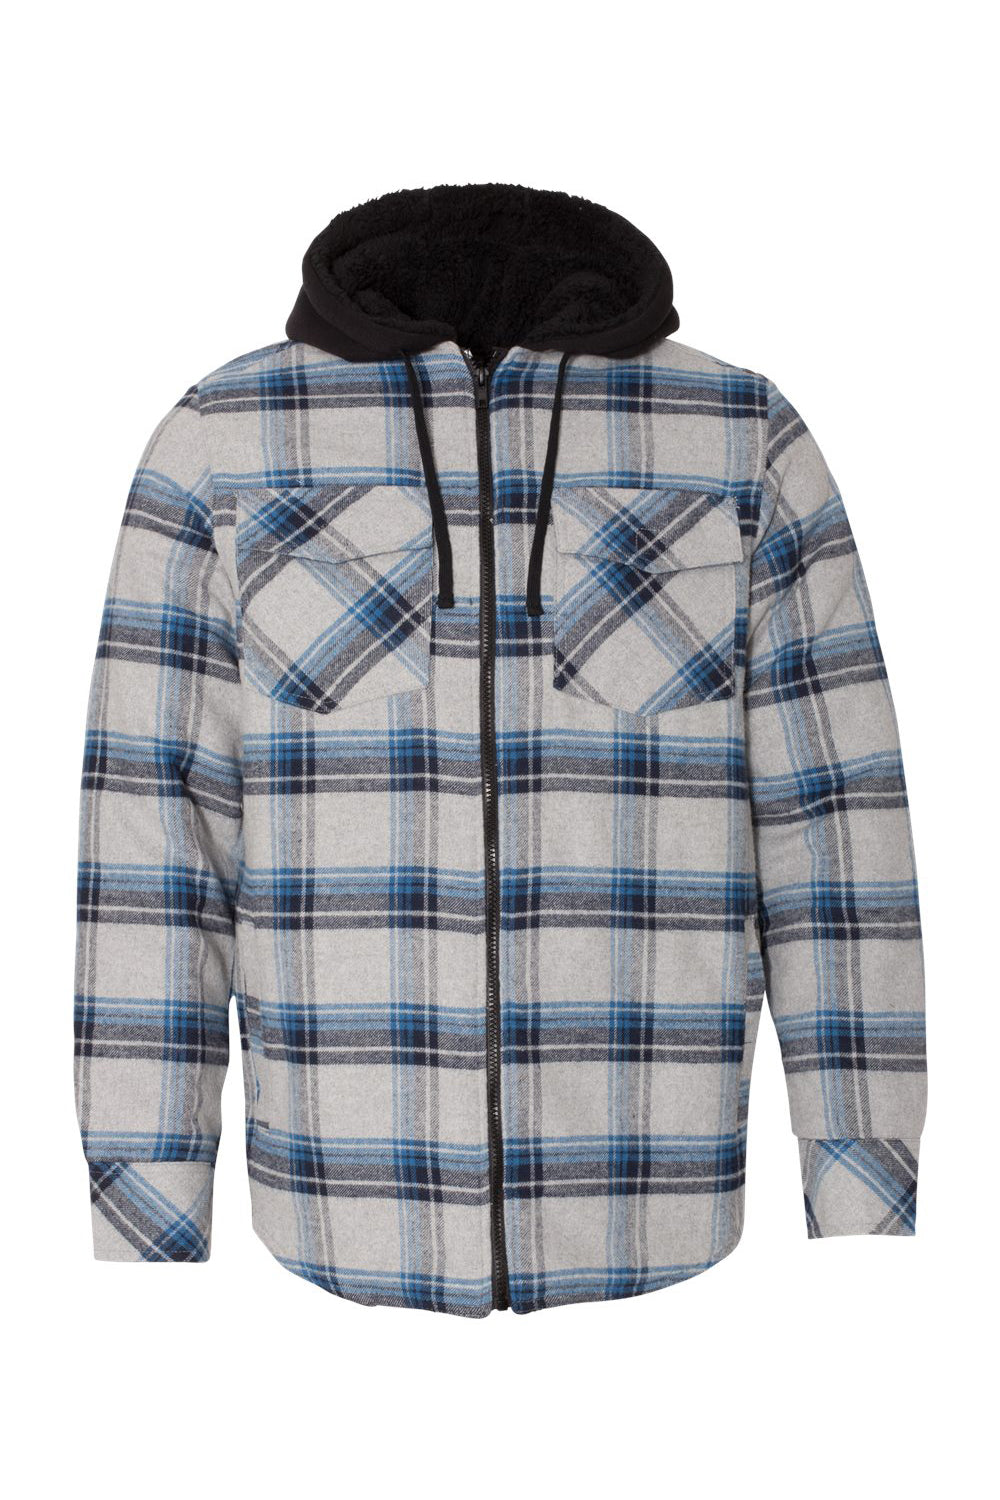 Burnside 8620 Mens Quilted Flannel Full Zip Hooded Jacket Grey/Blue Flat Front